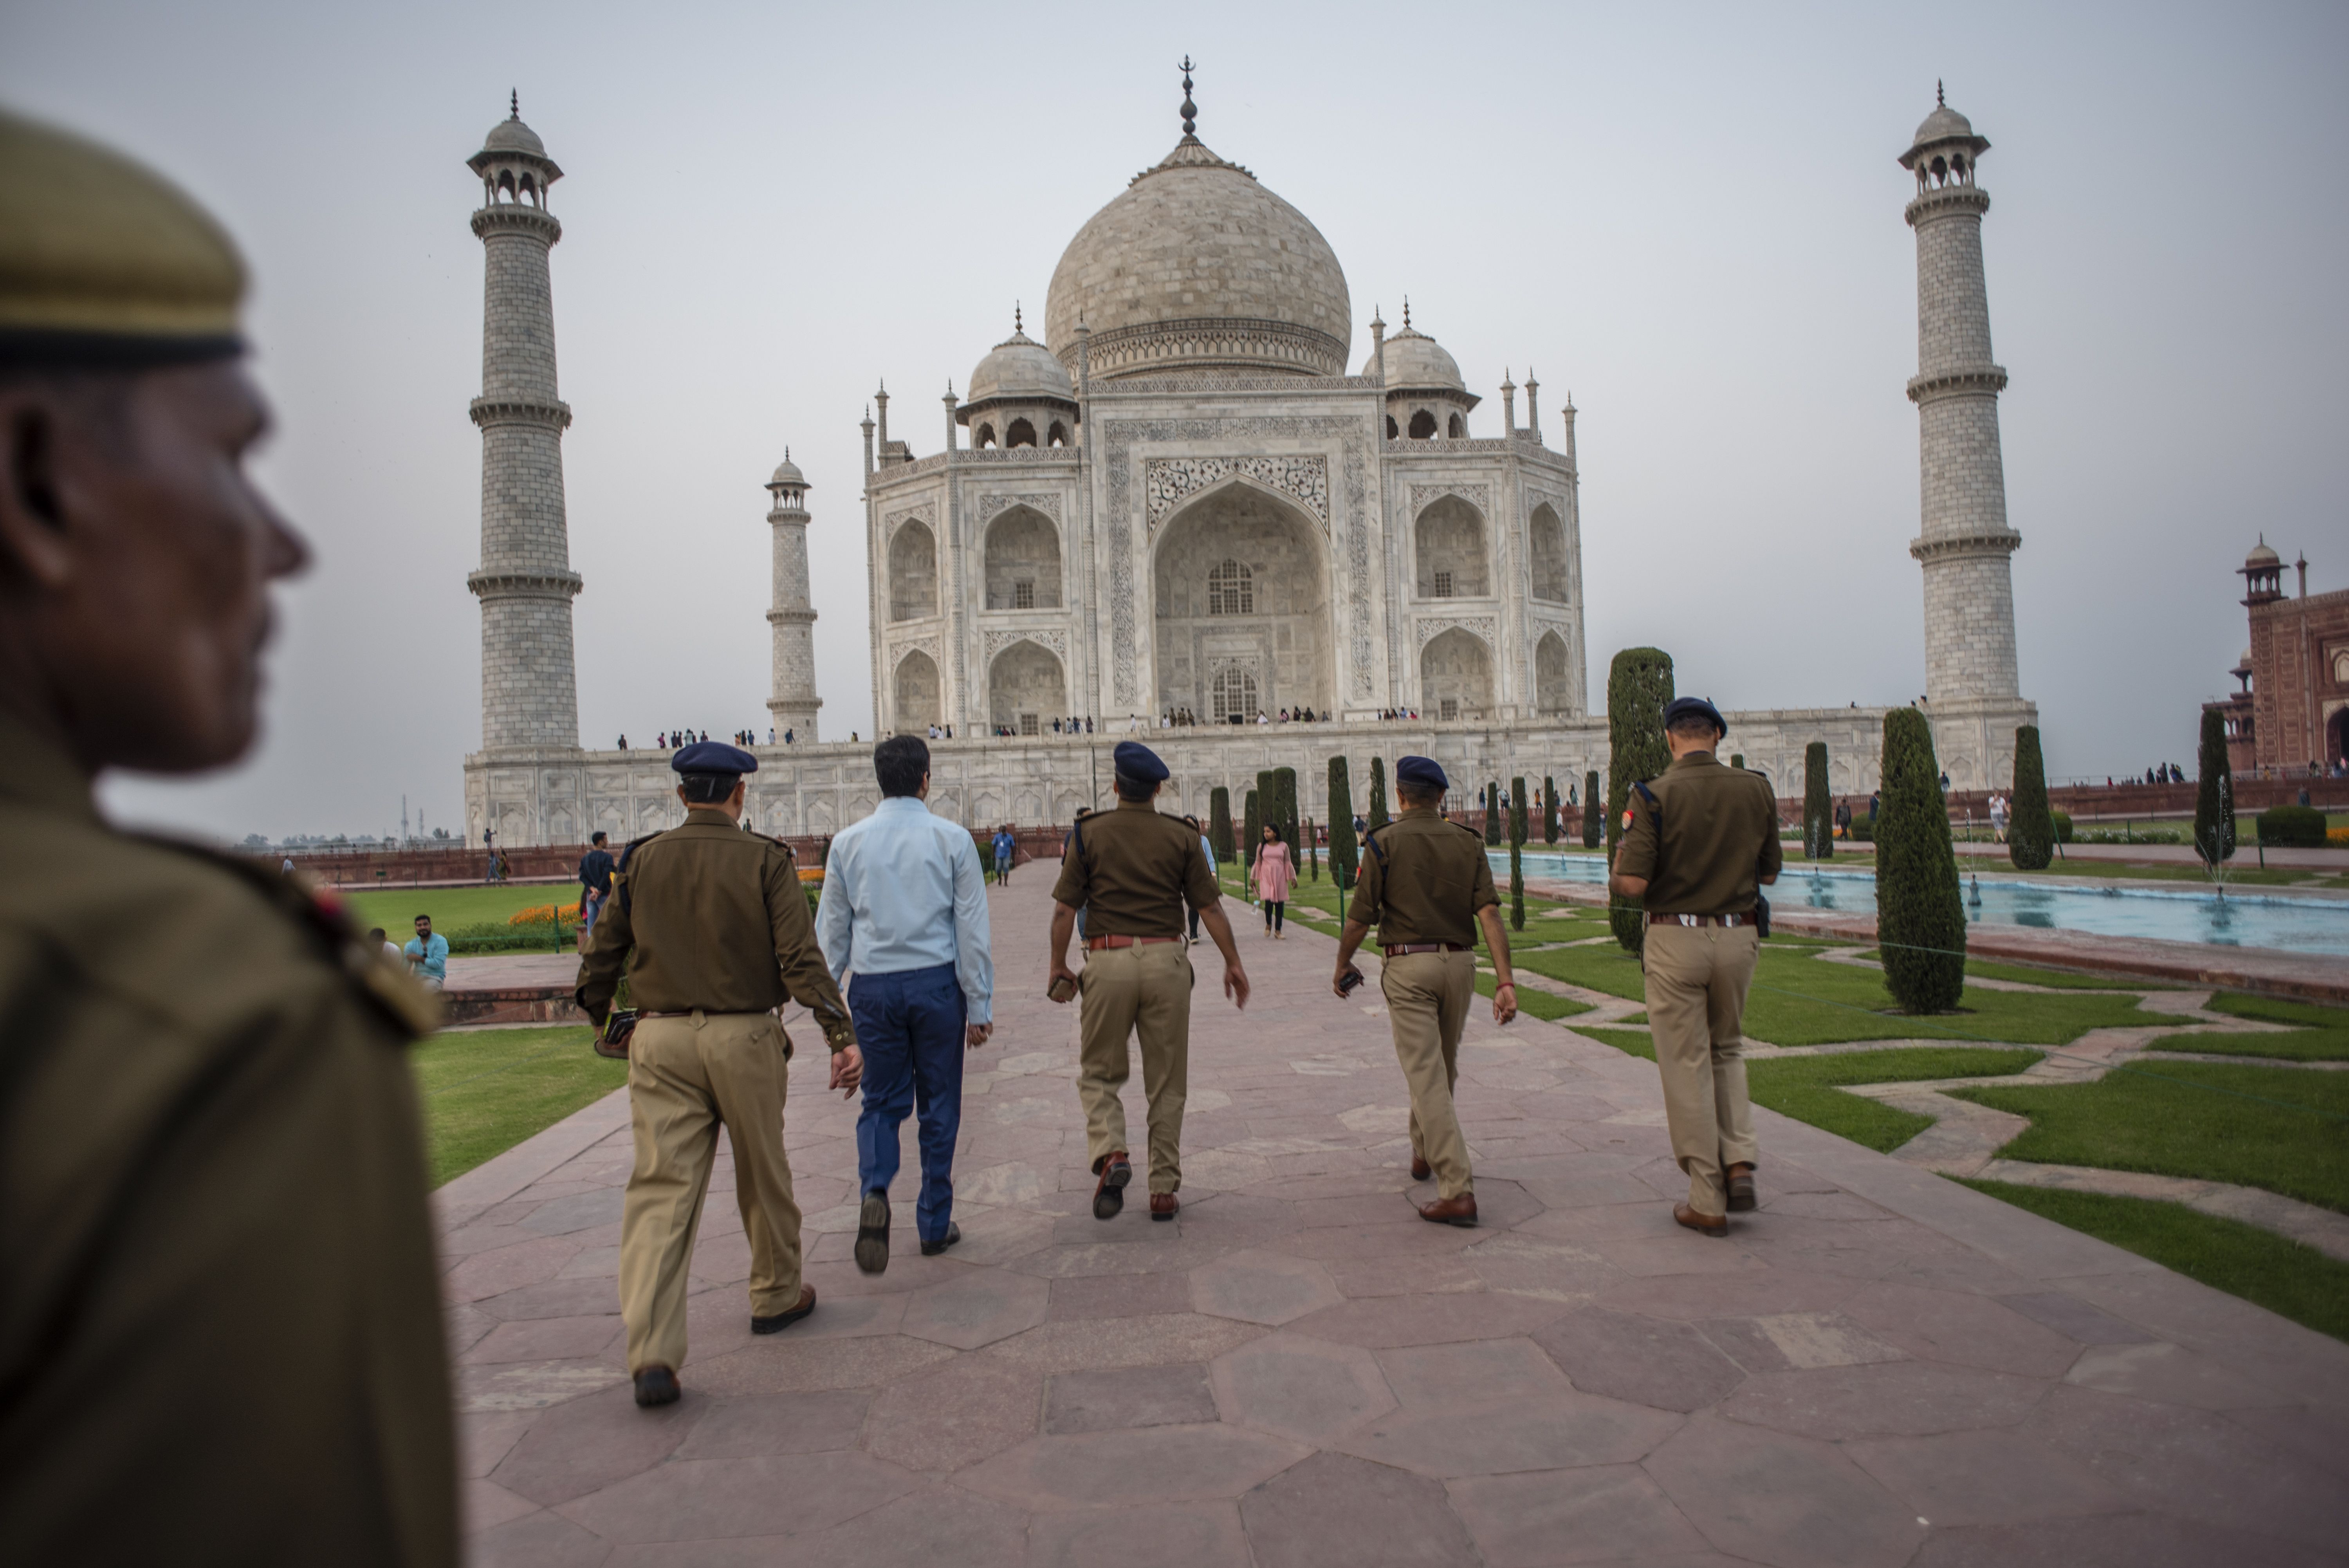  Indian police officers stand guard in the premises of the Taj Mahal on February 23, 2020 in Agra, India.